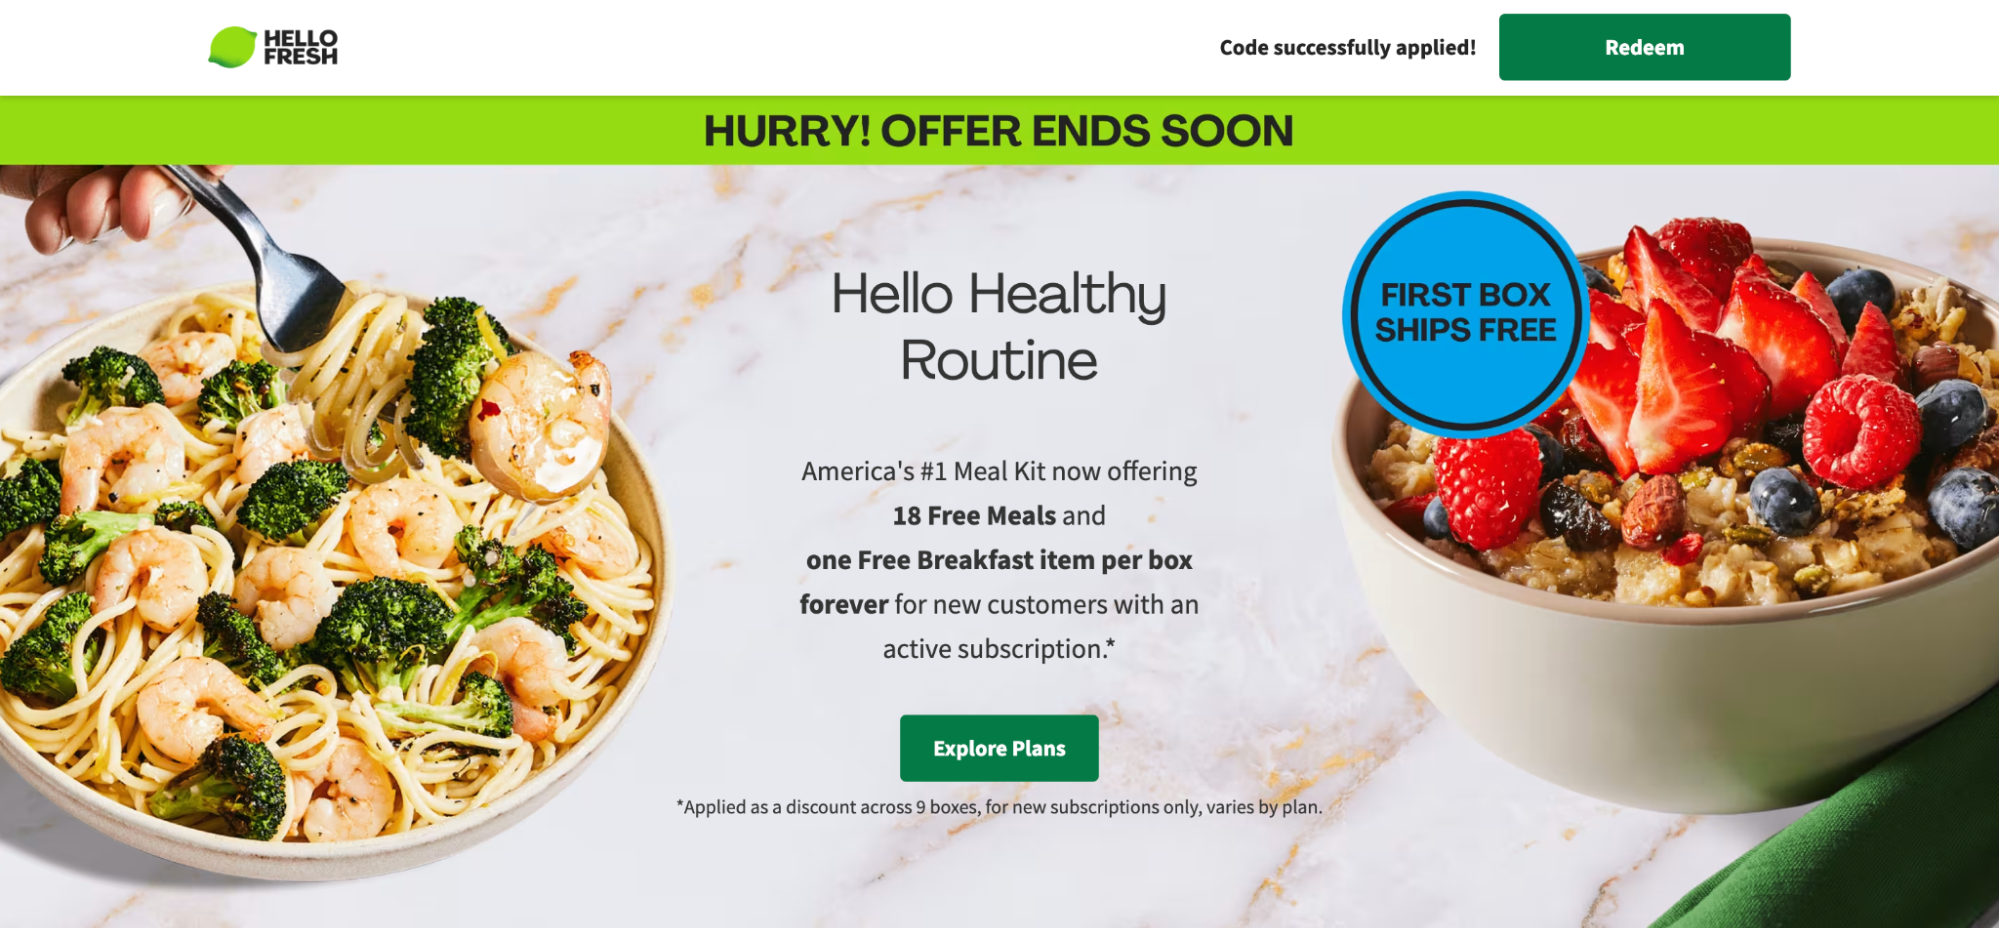 Hello Fresh homepage. Text reads "HURRY! OFFER ENDS SOON Hello Healthy Routine FIRST BOX SHIPS FREE America's #1 Meal Kit now offering 18 Free Meals and one Free Breakfast item per box forever for new customers with an active subscription.*"